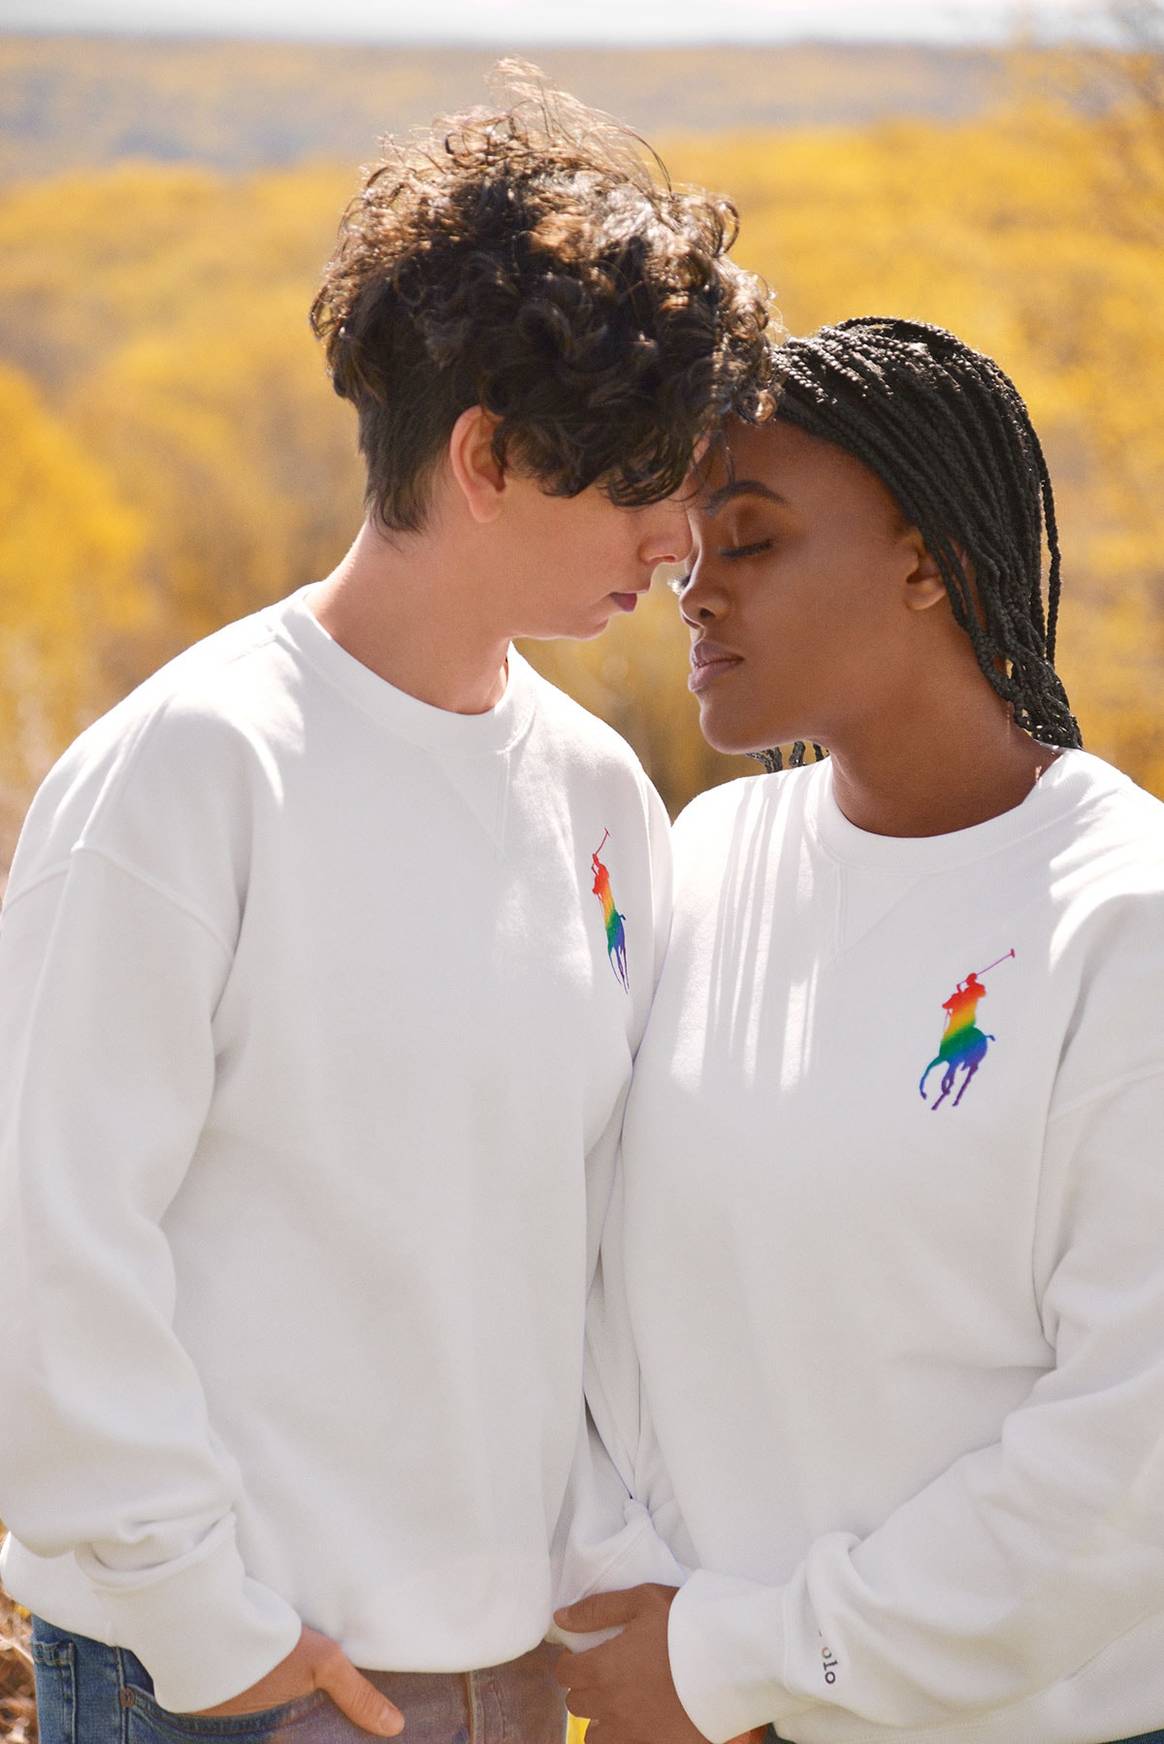 Ralph Lauren launches capsule collection in honor of Pride